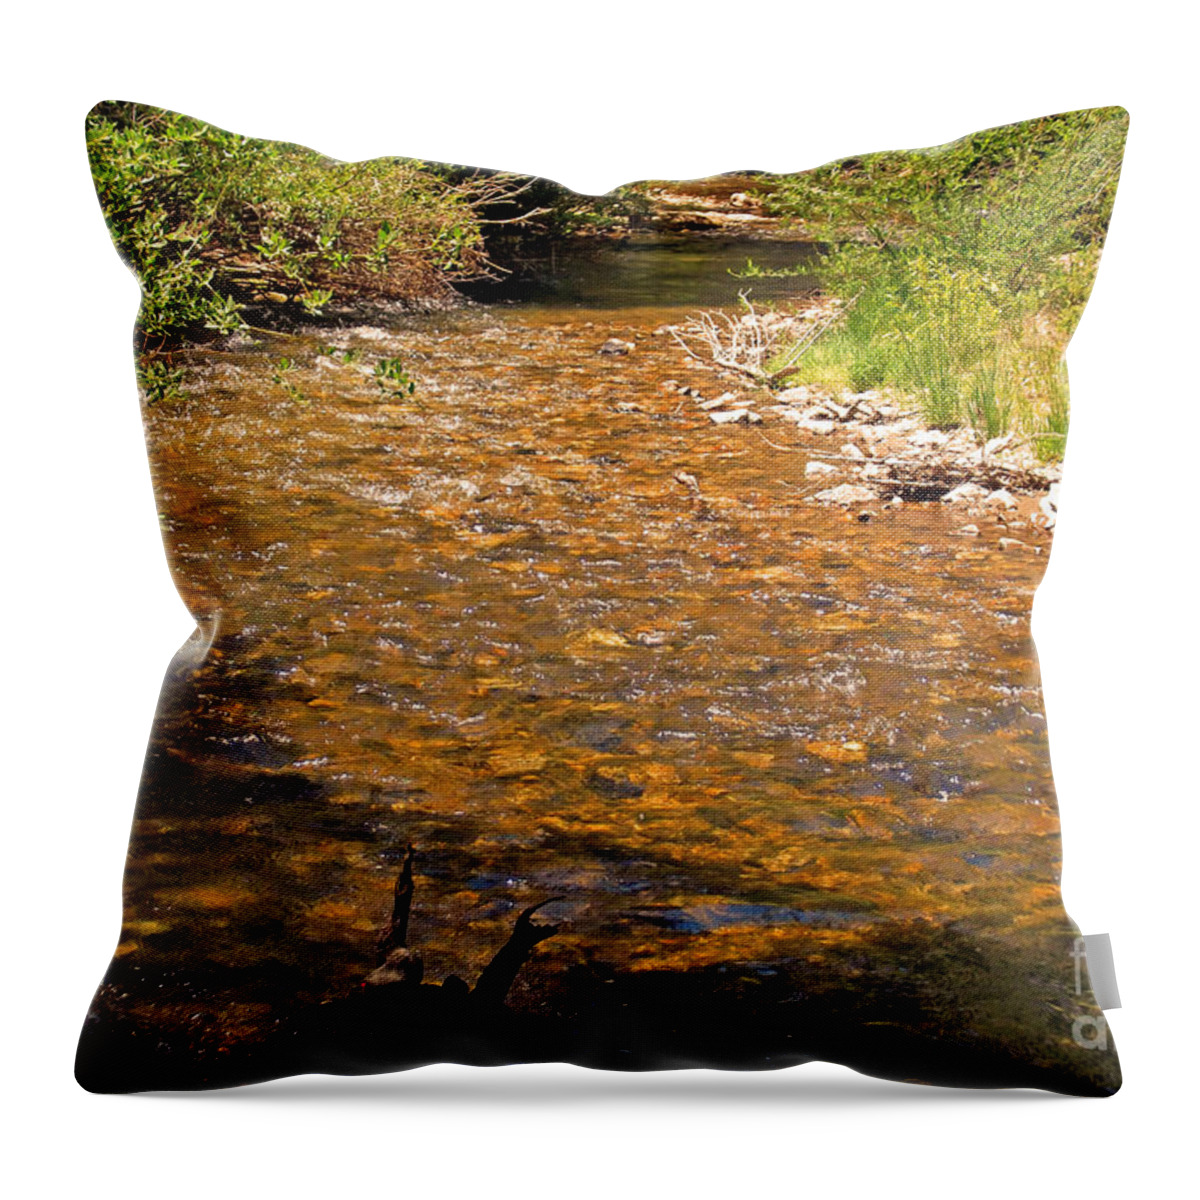 Water Throw Pillow featuring the photograph Up a Creek by Jennifer Lavigne